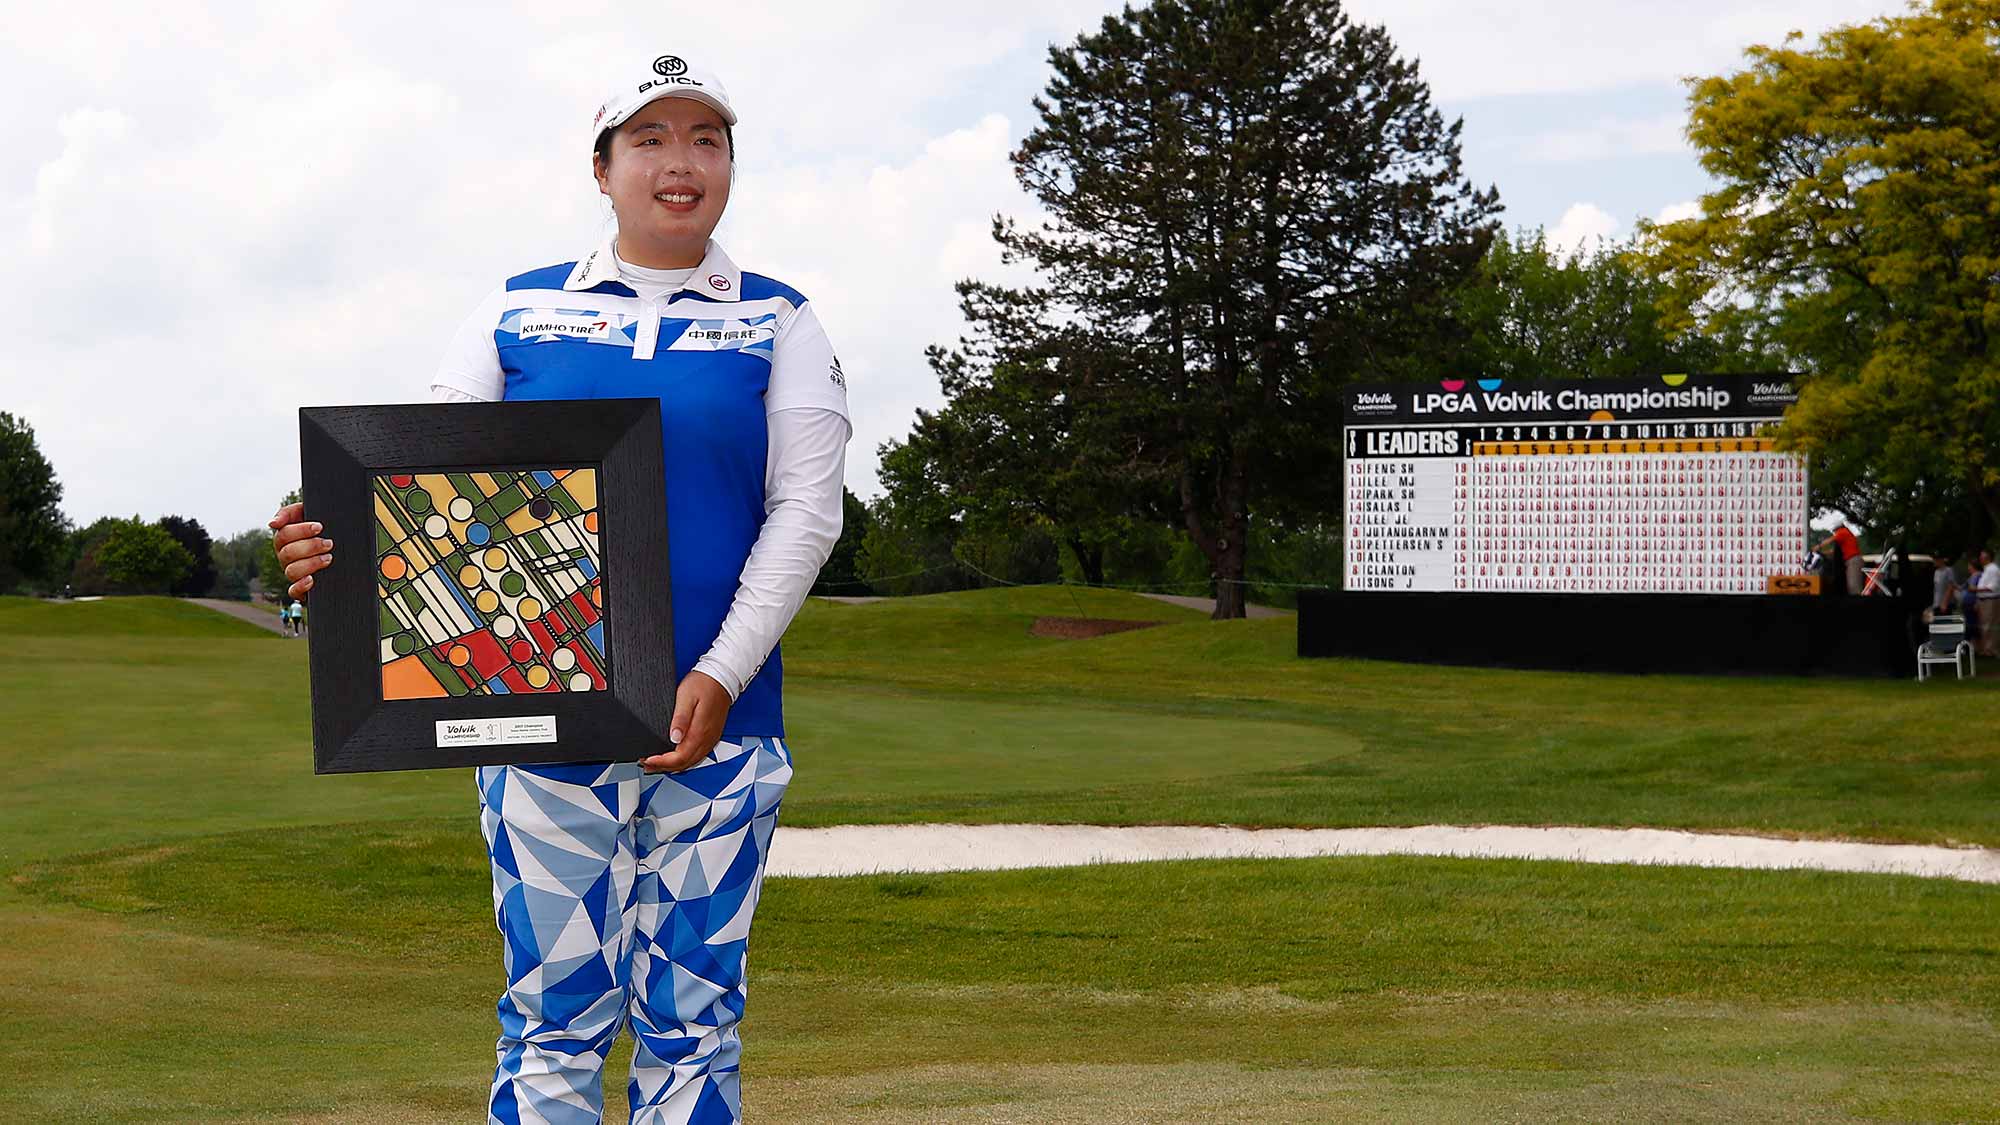 Shanshan Feng of China poses with the championship trophy after winning the LPGA Volvik Championship on May 28, 2017 at Travis Pointe Country Club Ann Arbor, Michigan